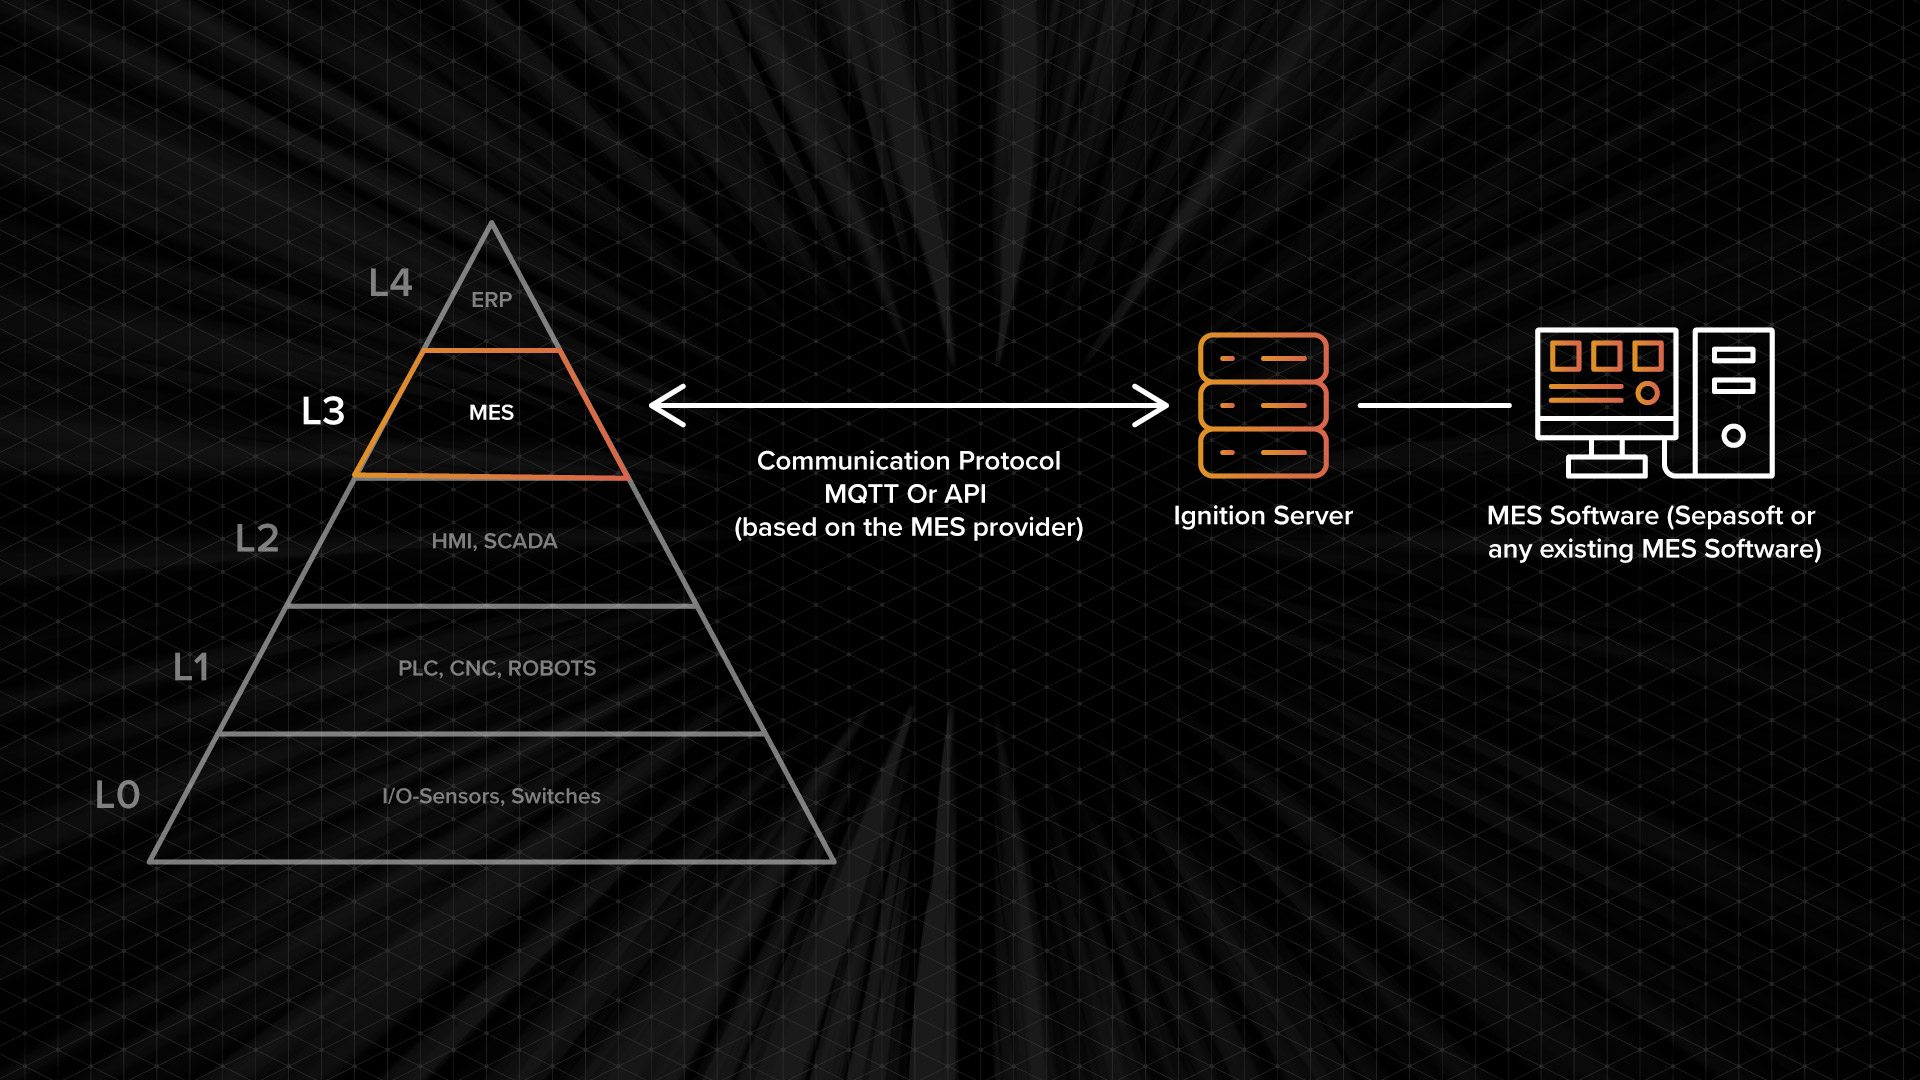 Graphic of Layer 3 of the Automation Pyramid.